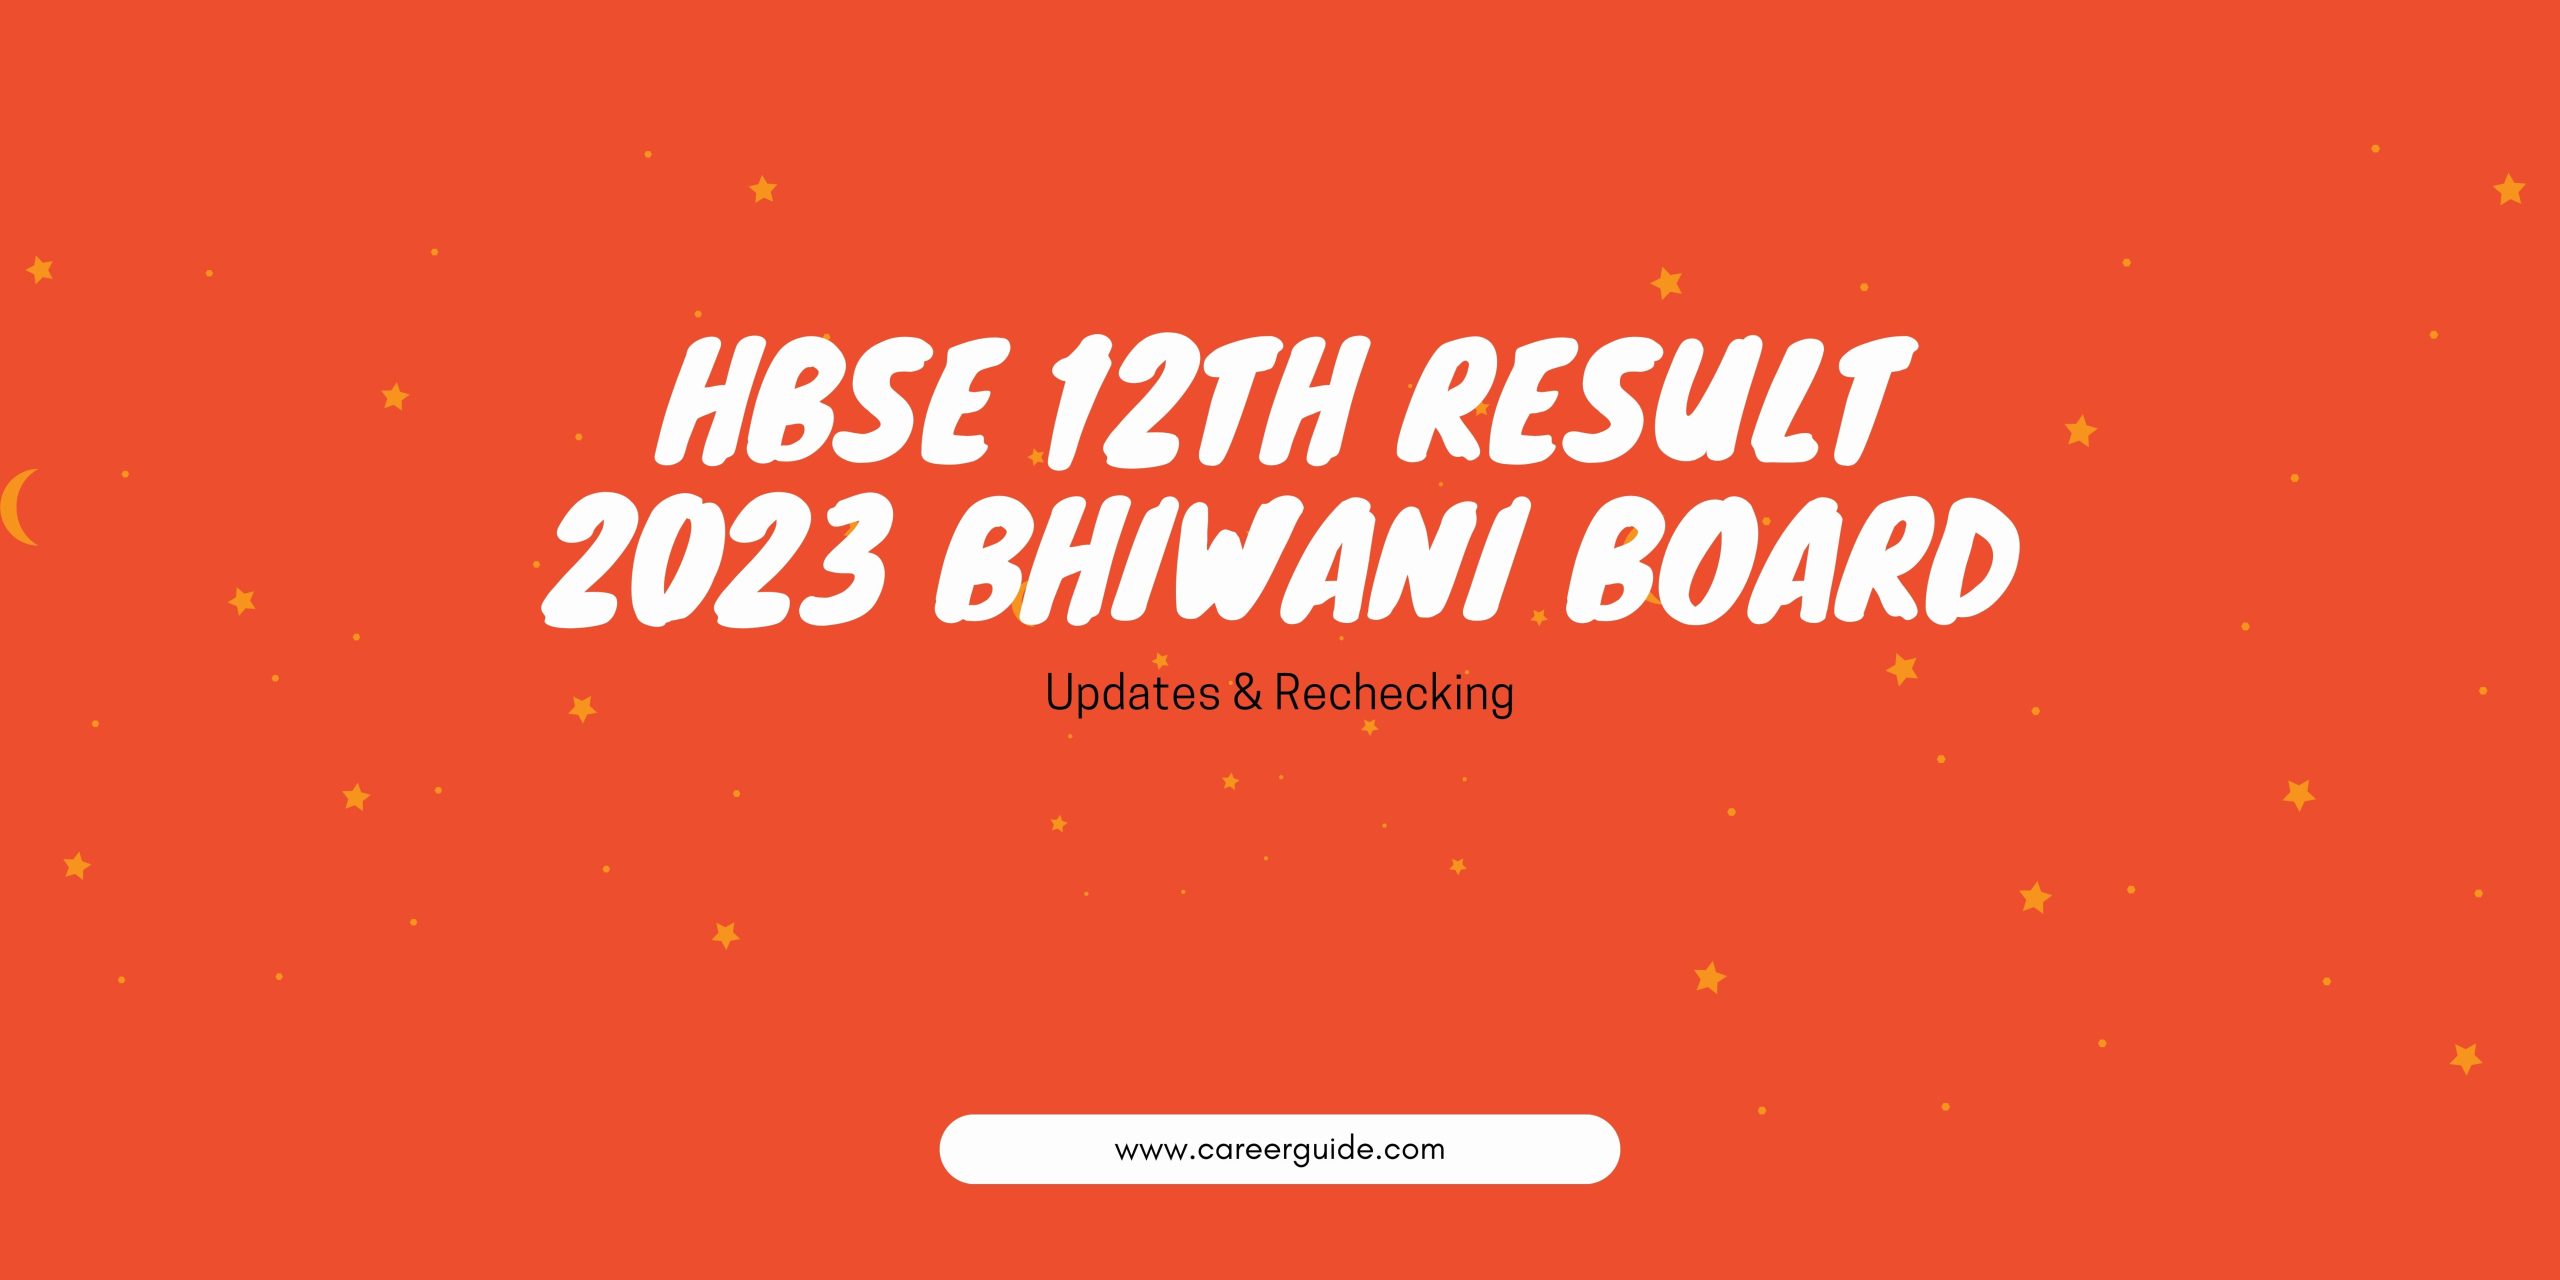 HBSE 12th Result 2023 Bhiwani Board